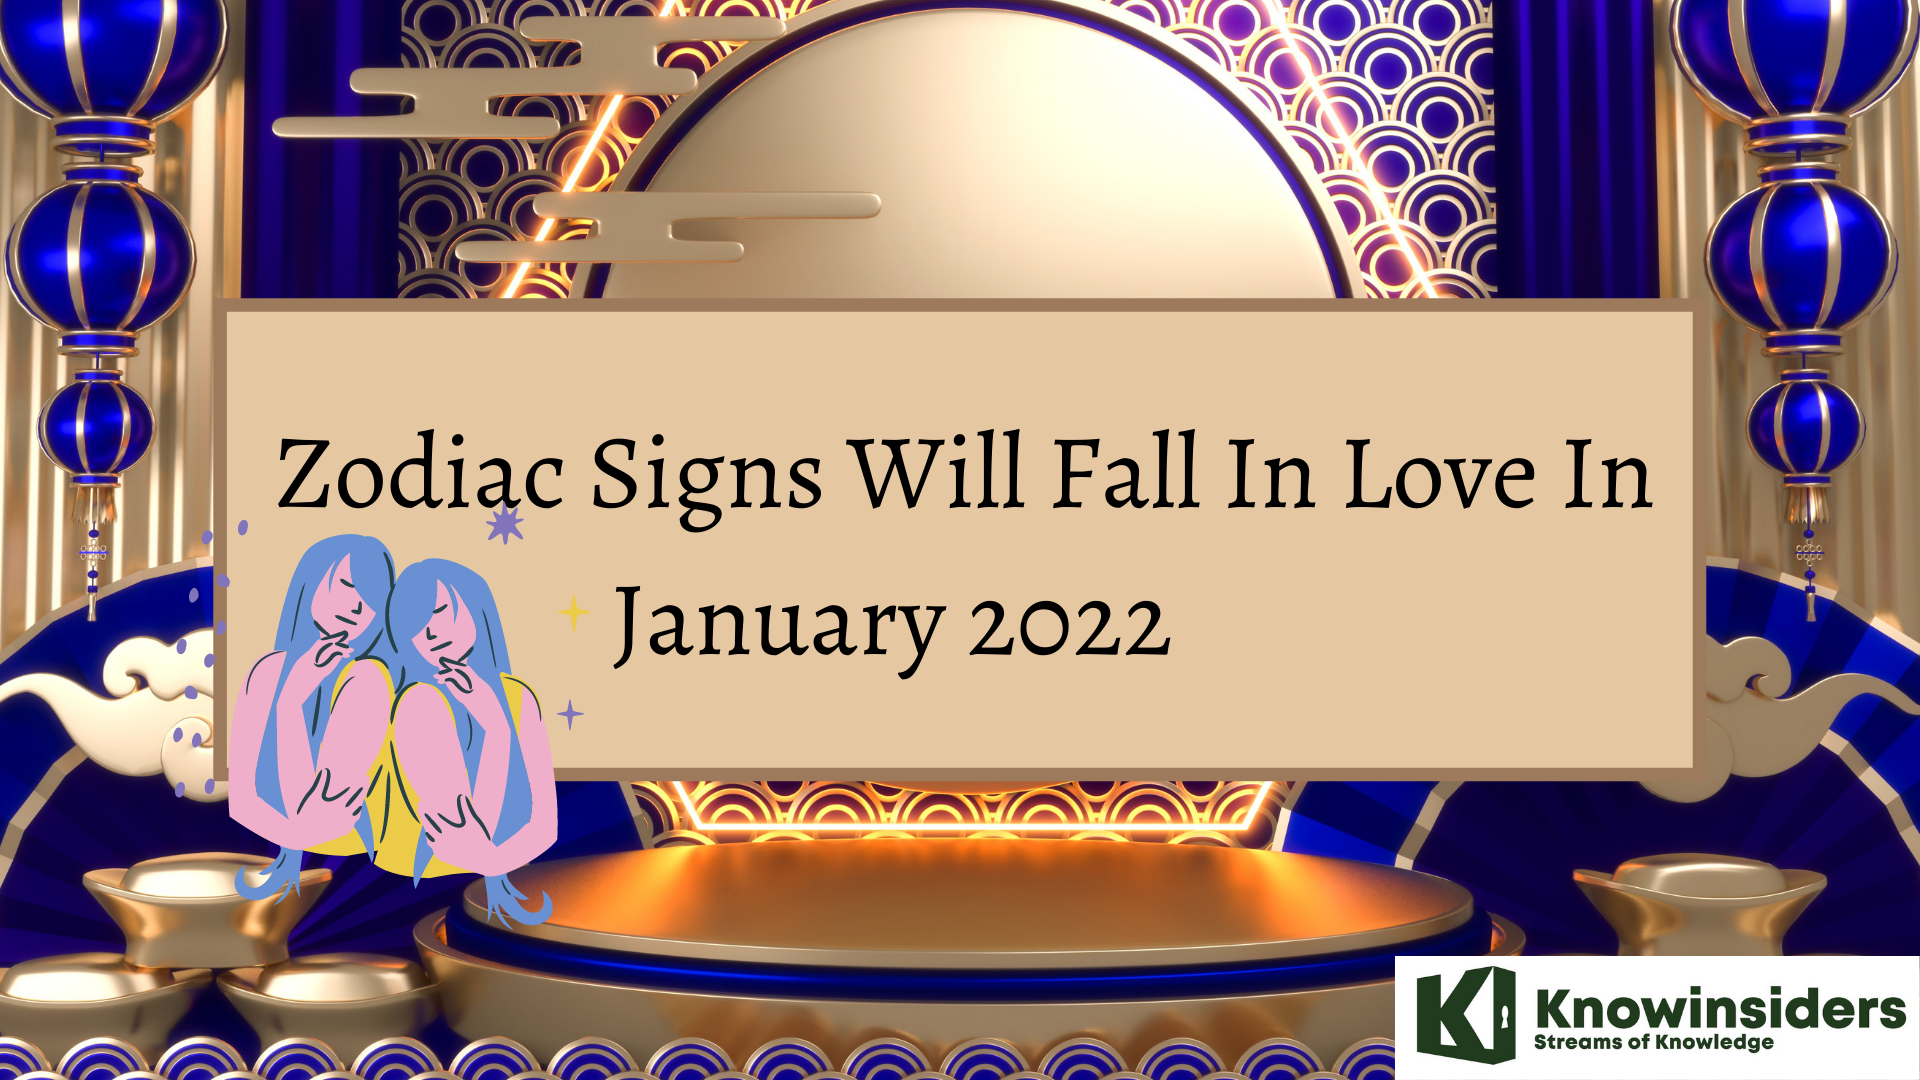 5 Zodic Signs Will Fall In Love of January 2022